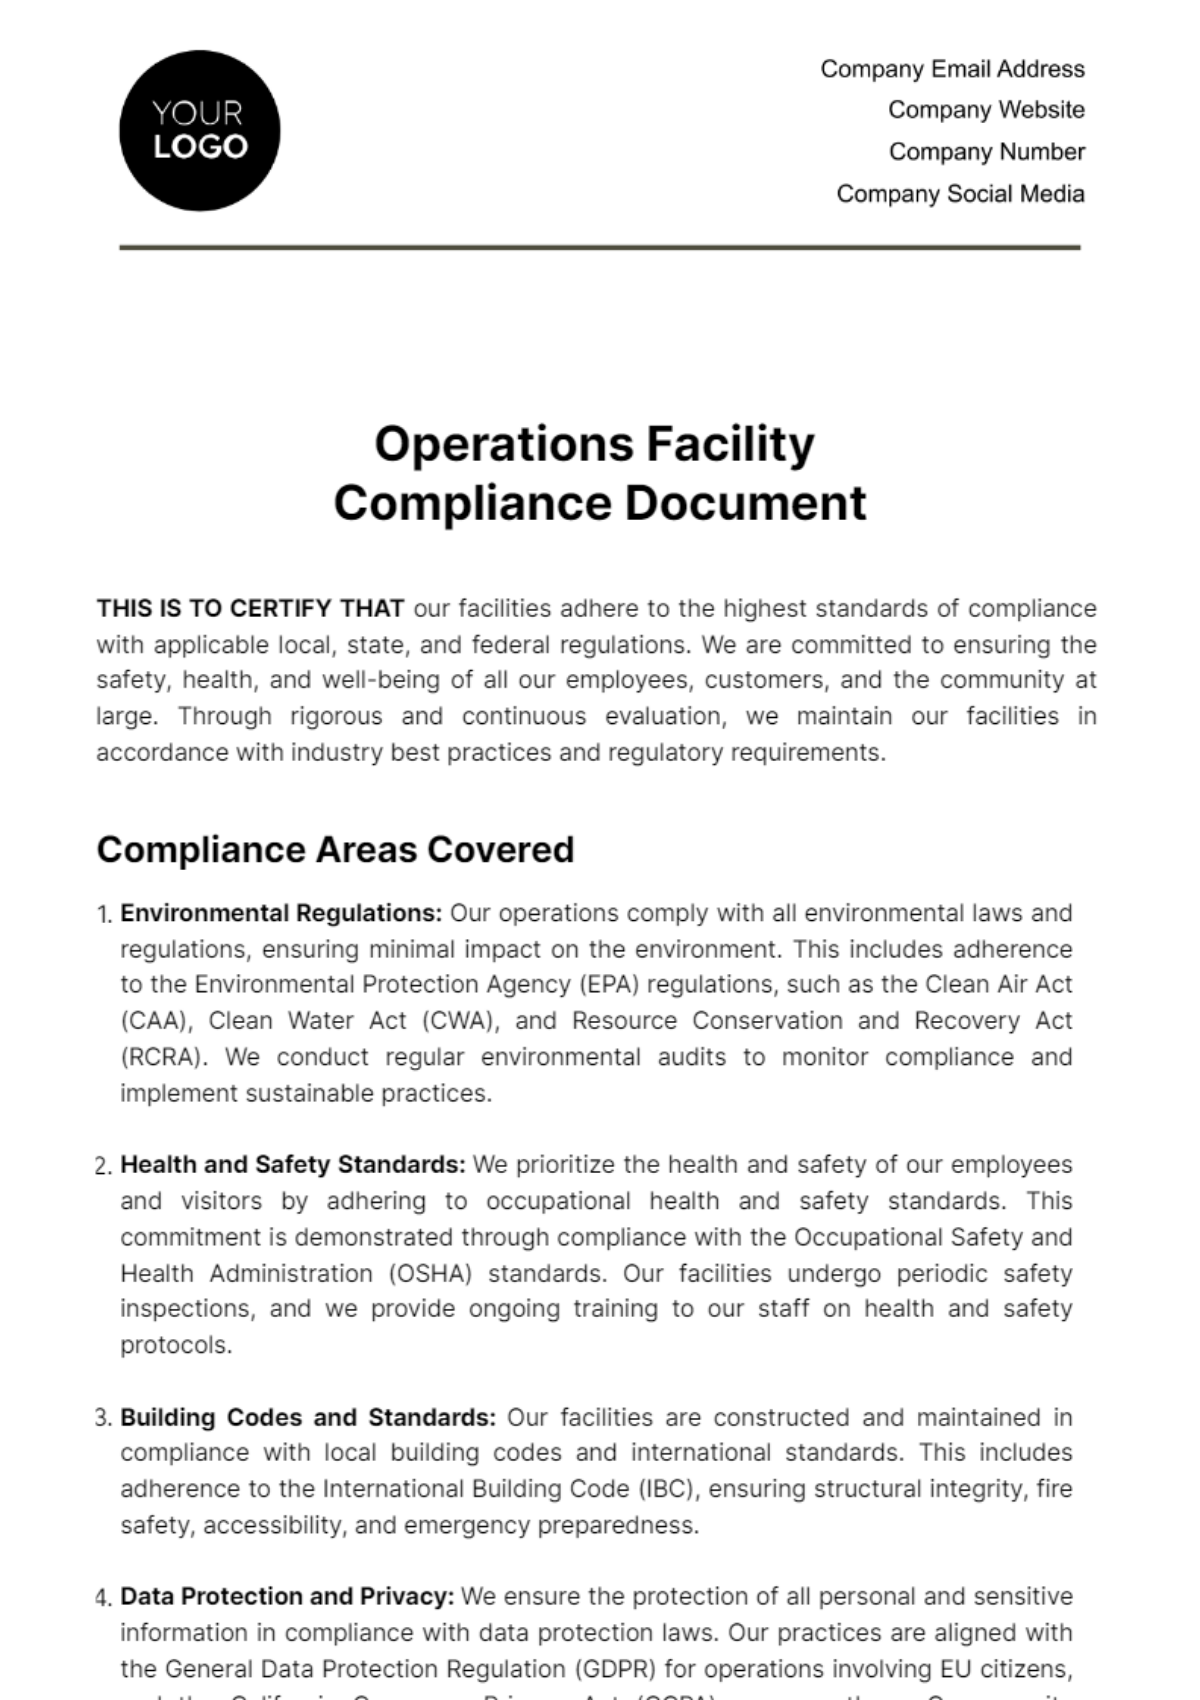 Operations Facility Compliance Document Template